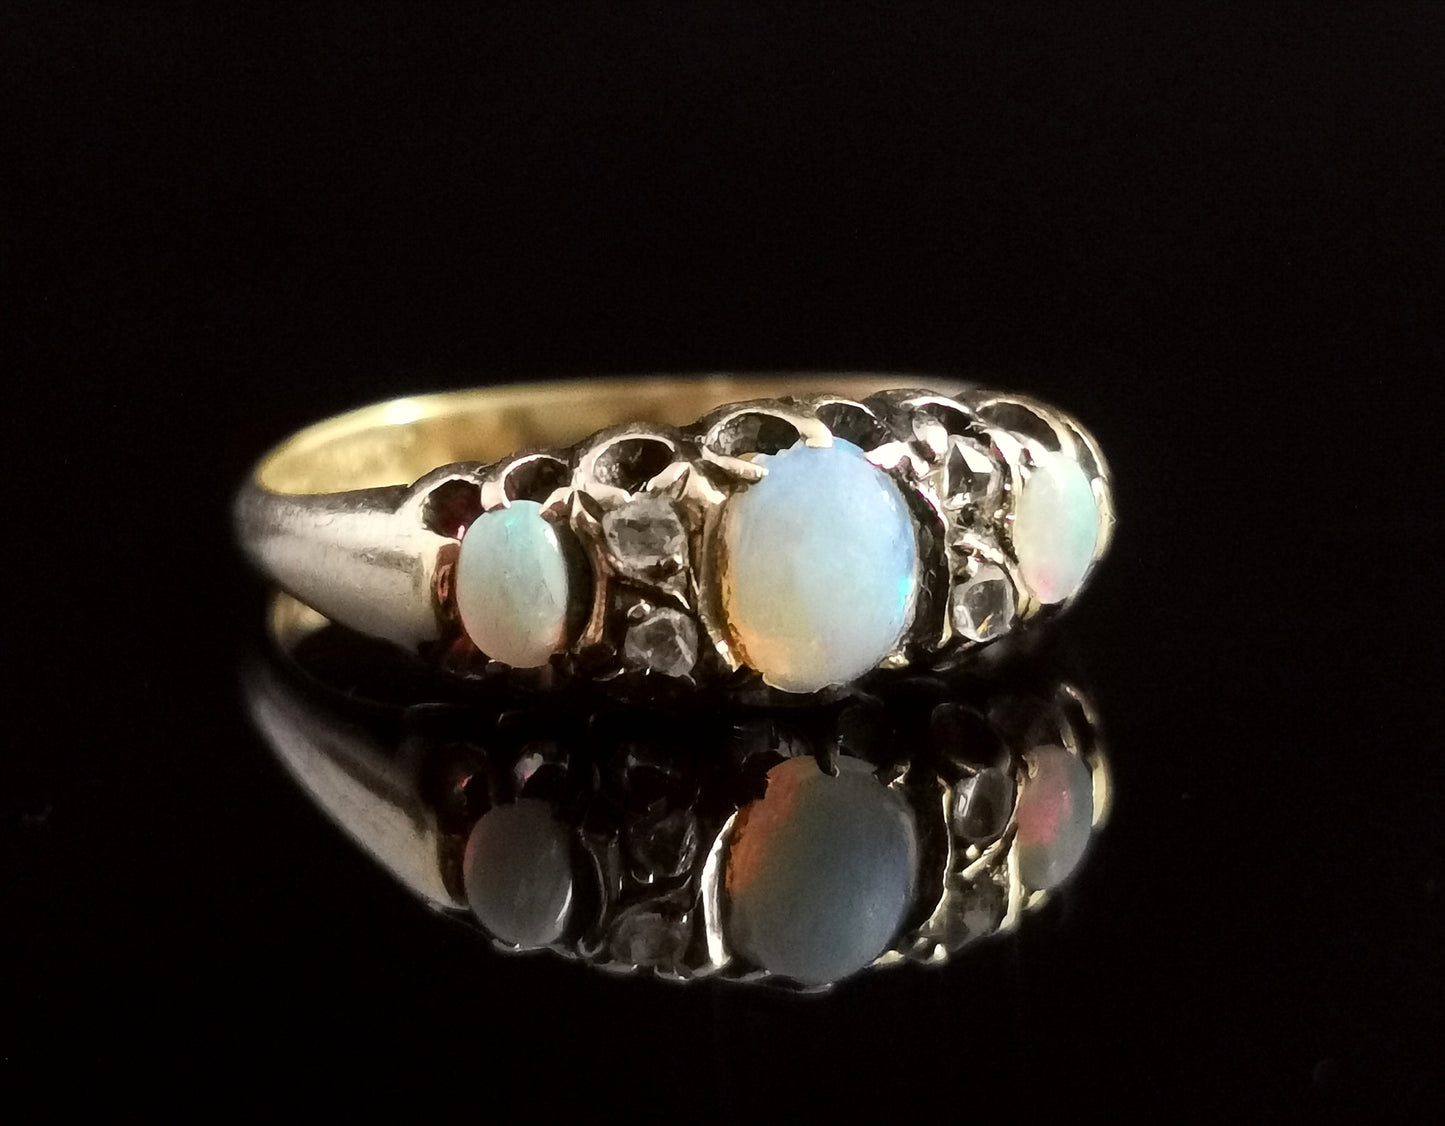 Antique Opal and Rose cut diamond ring, 18ct gold, Victorian